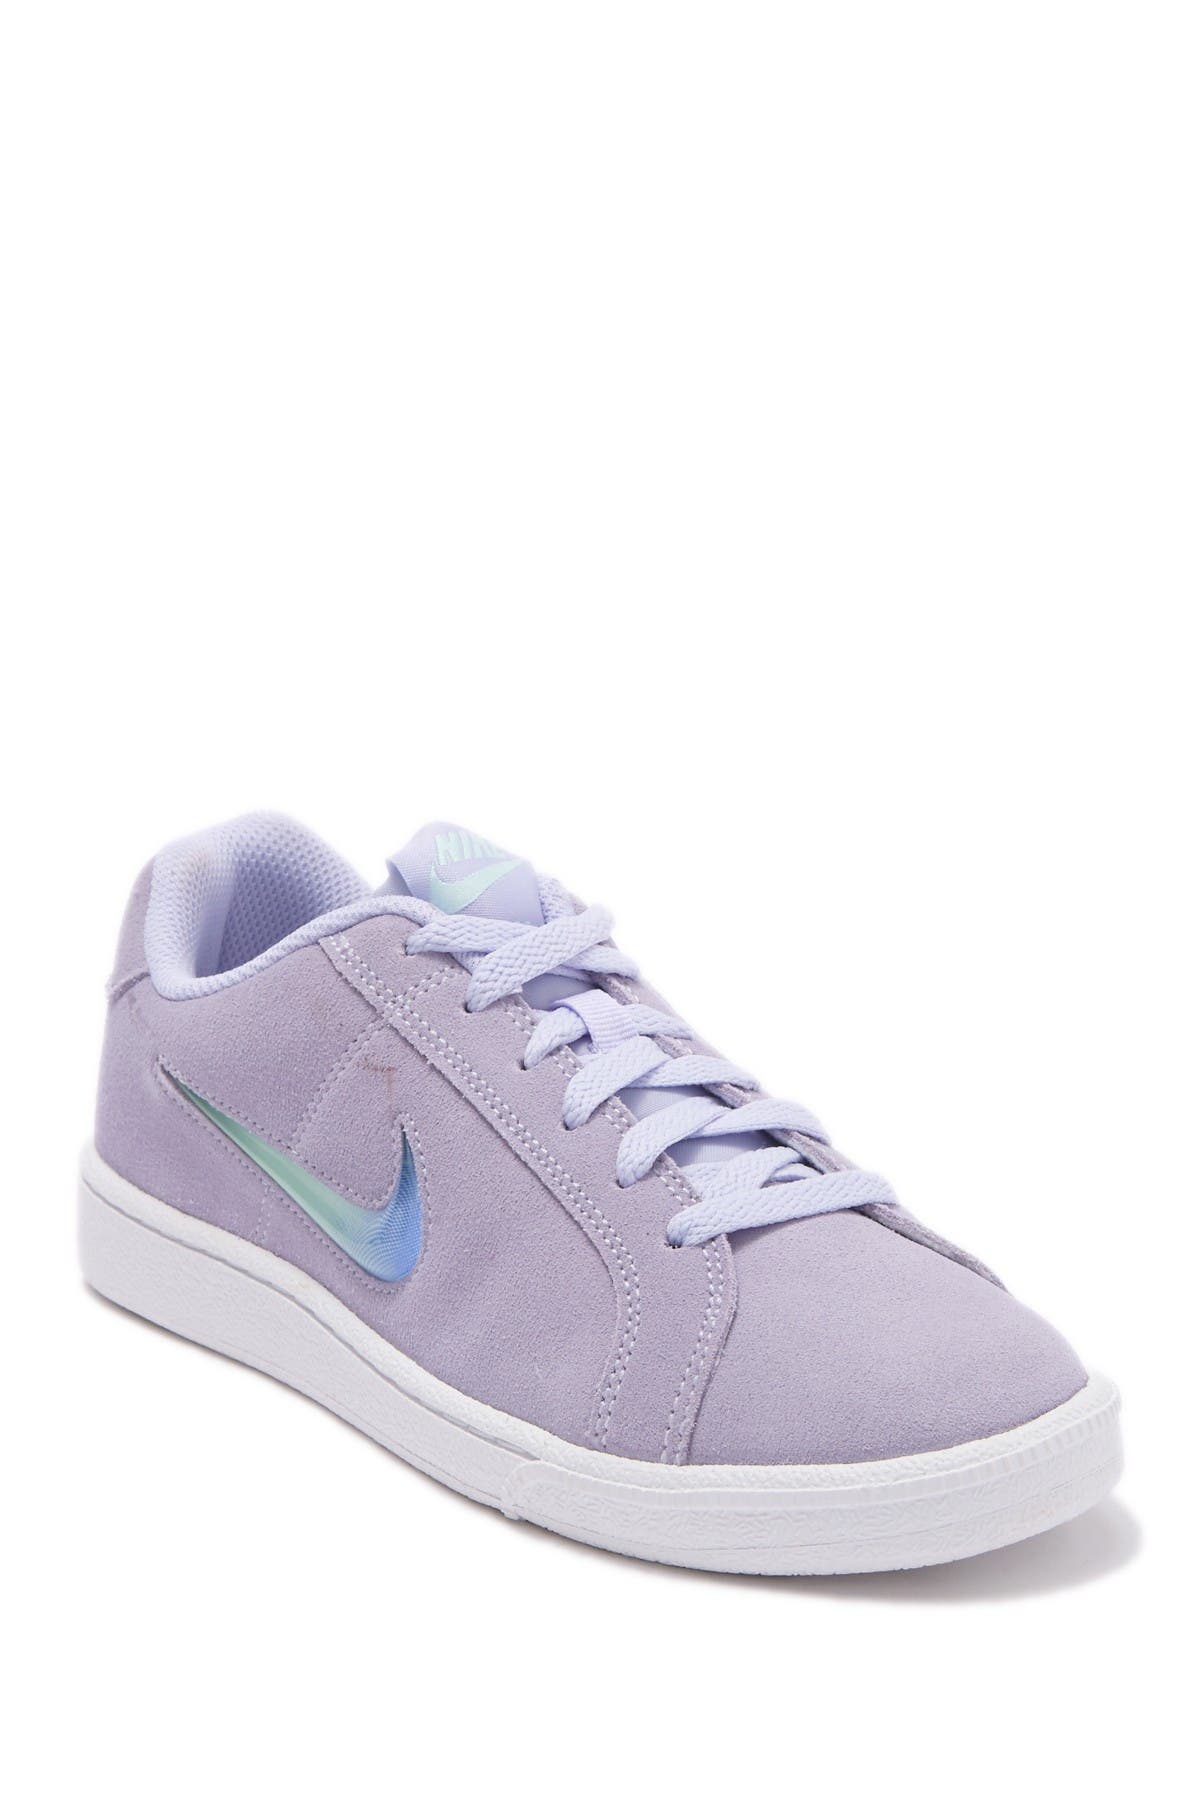 nike court royale suede pink